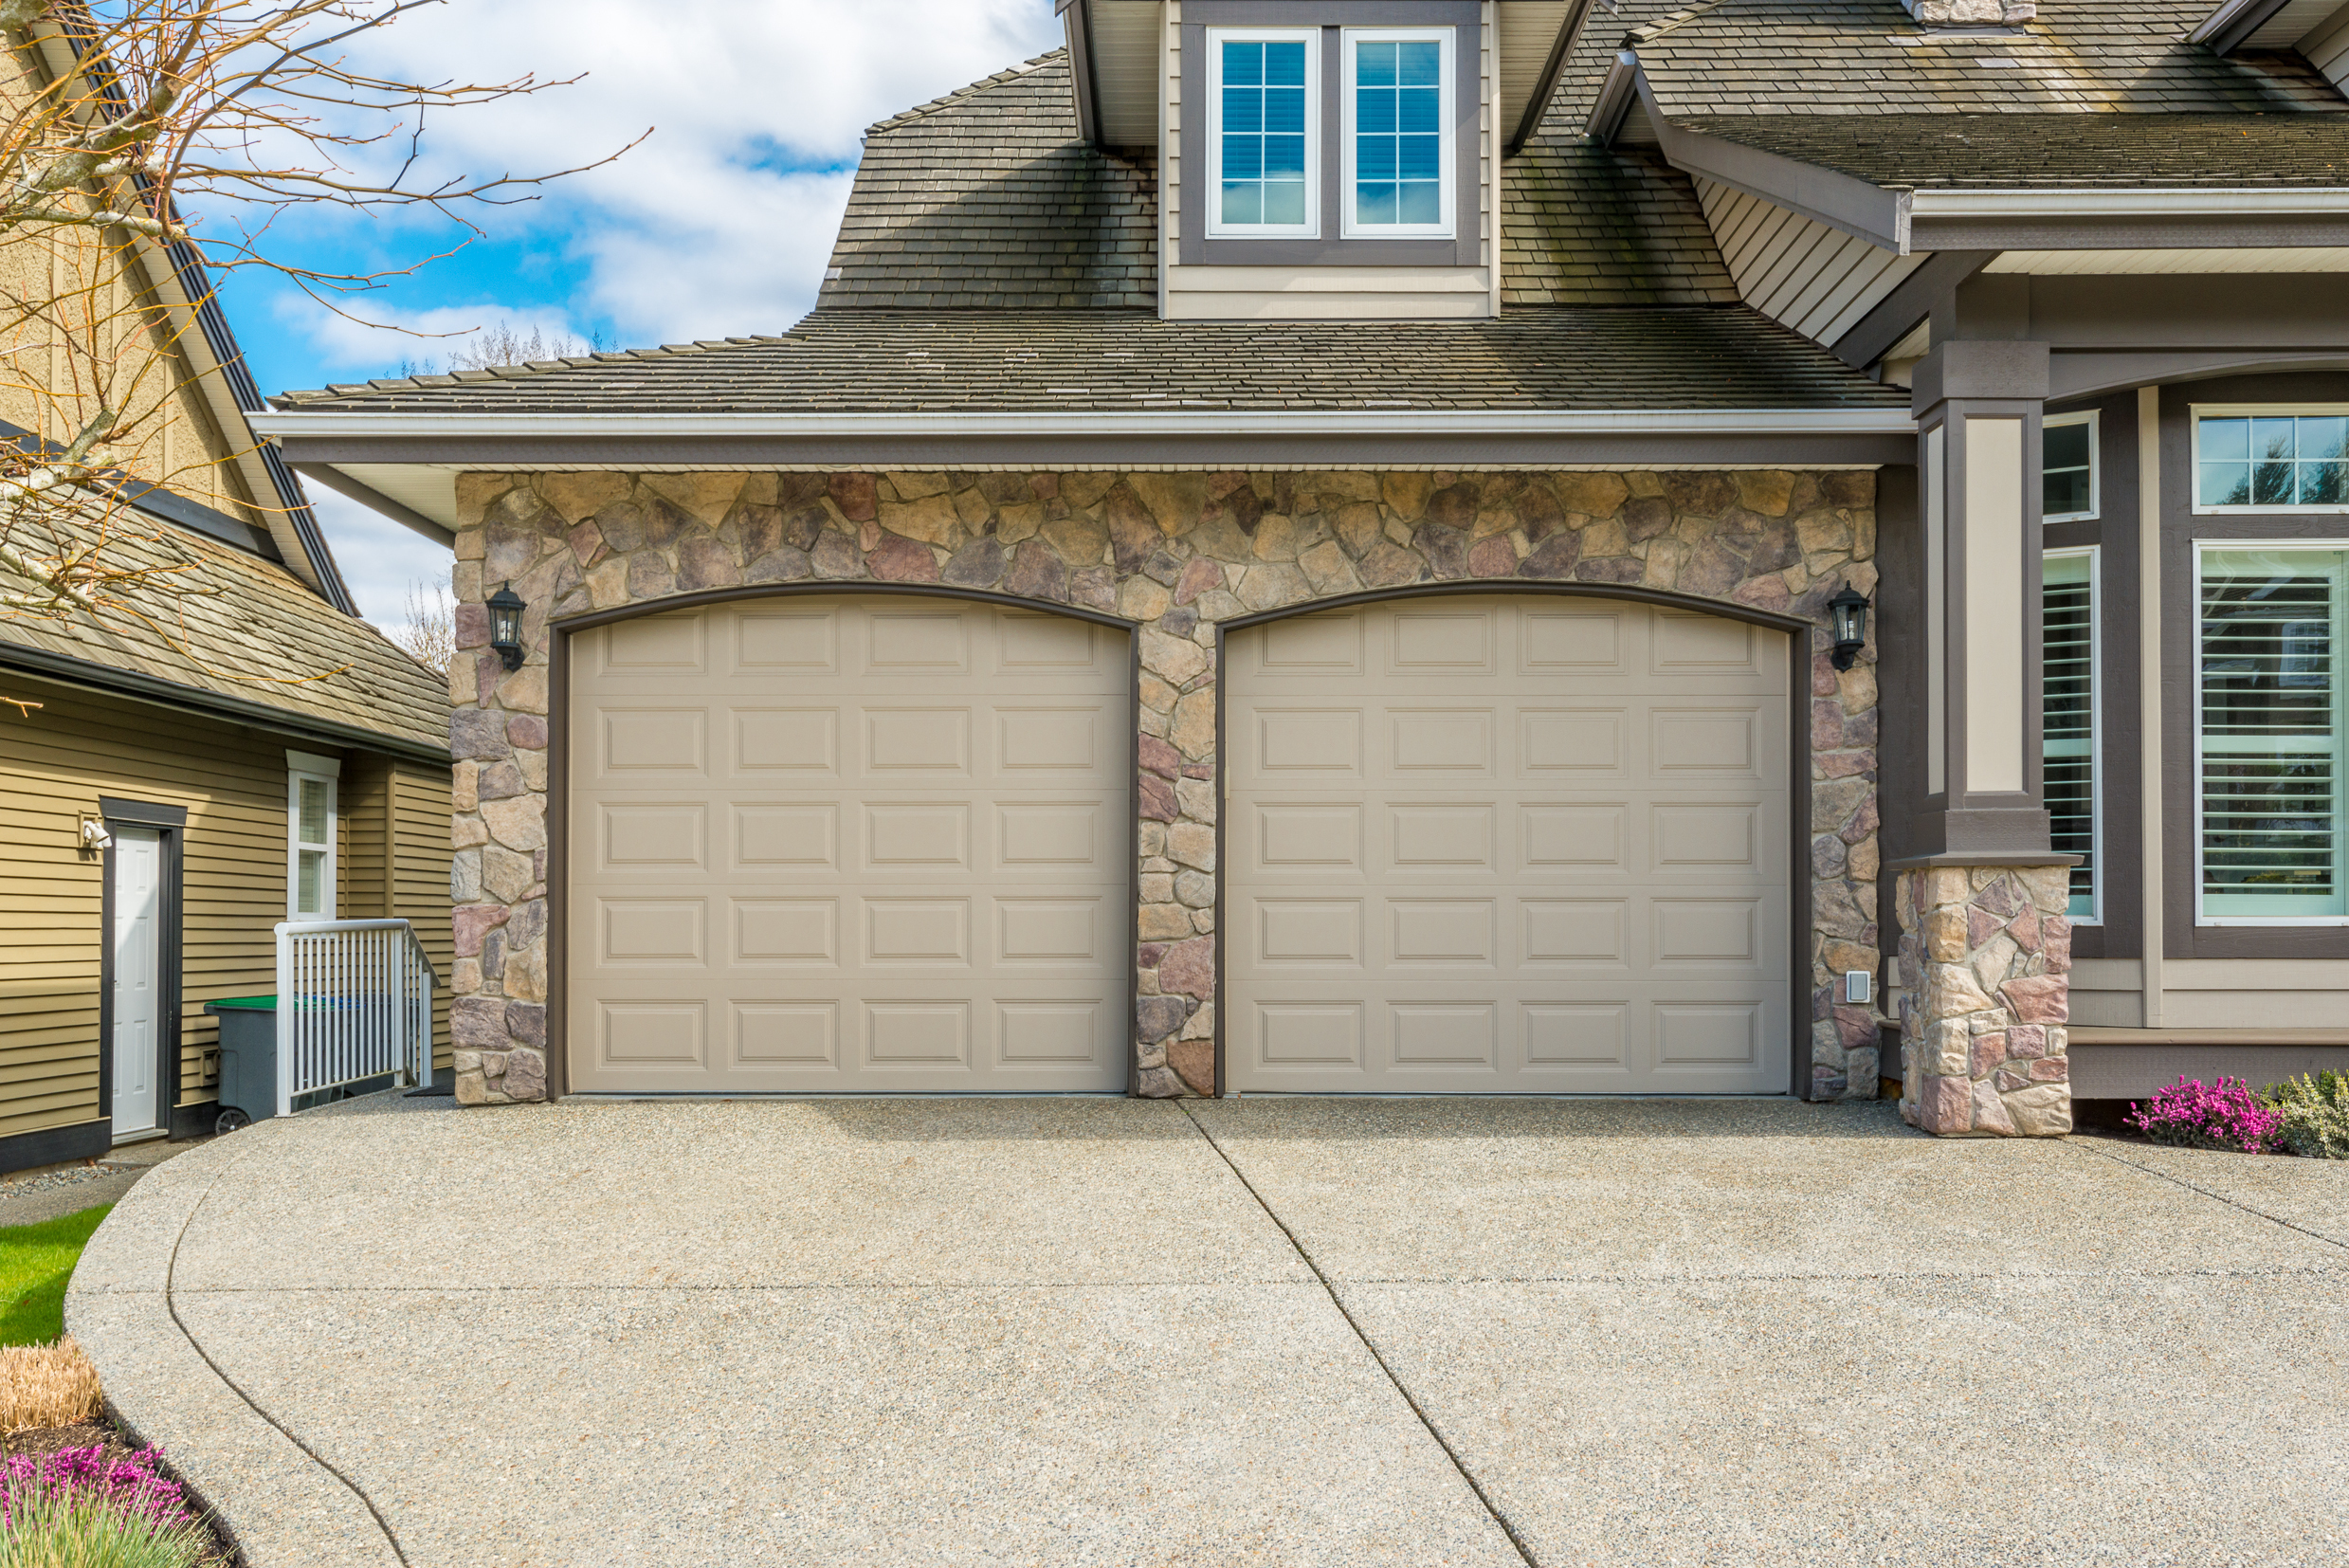 Two-car garage attached to large house with stone siding.